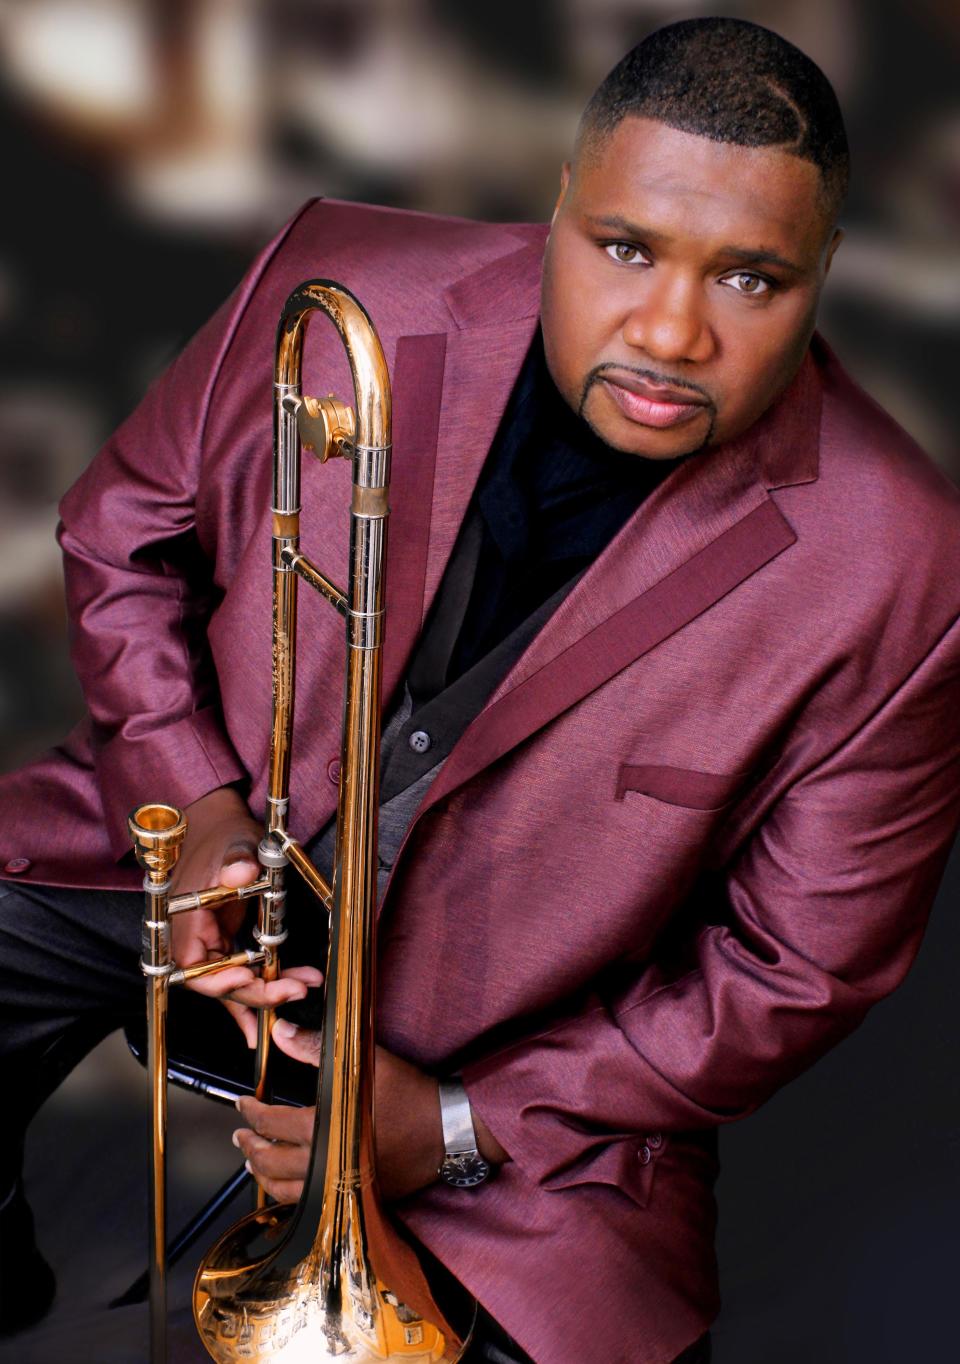 Trombonist Wycliffe Gordon will headline the 54th annual Green Bay Jazz Fest with a concert with the Green Bay Jazz Orchestra on April 13 at The Weidner.